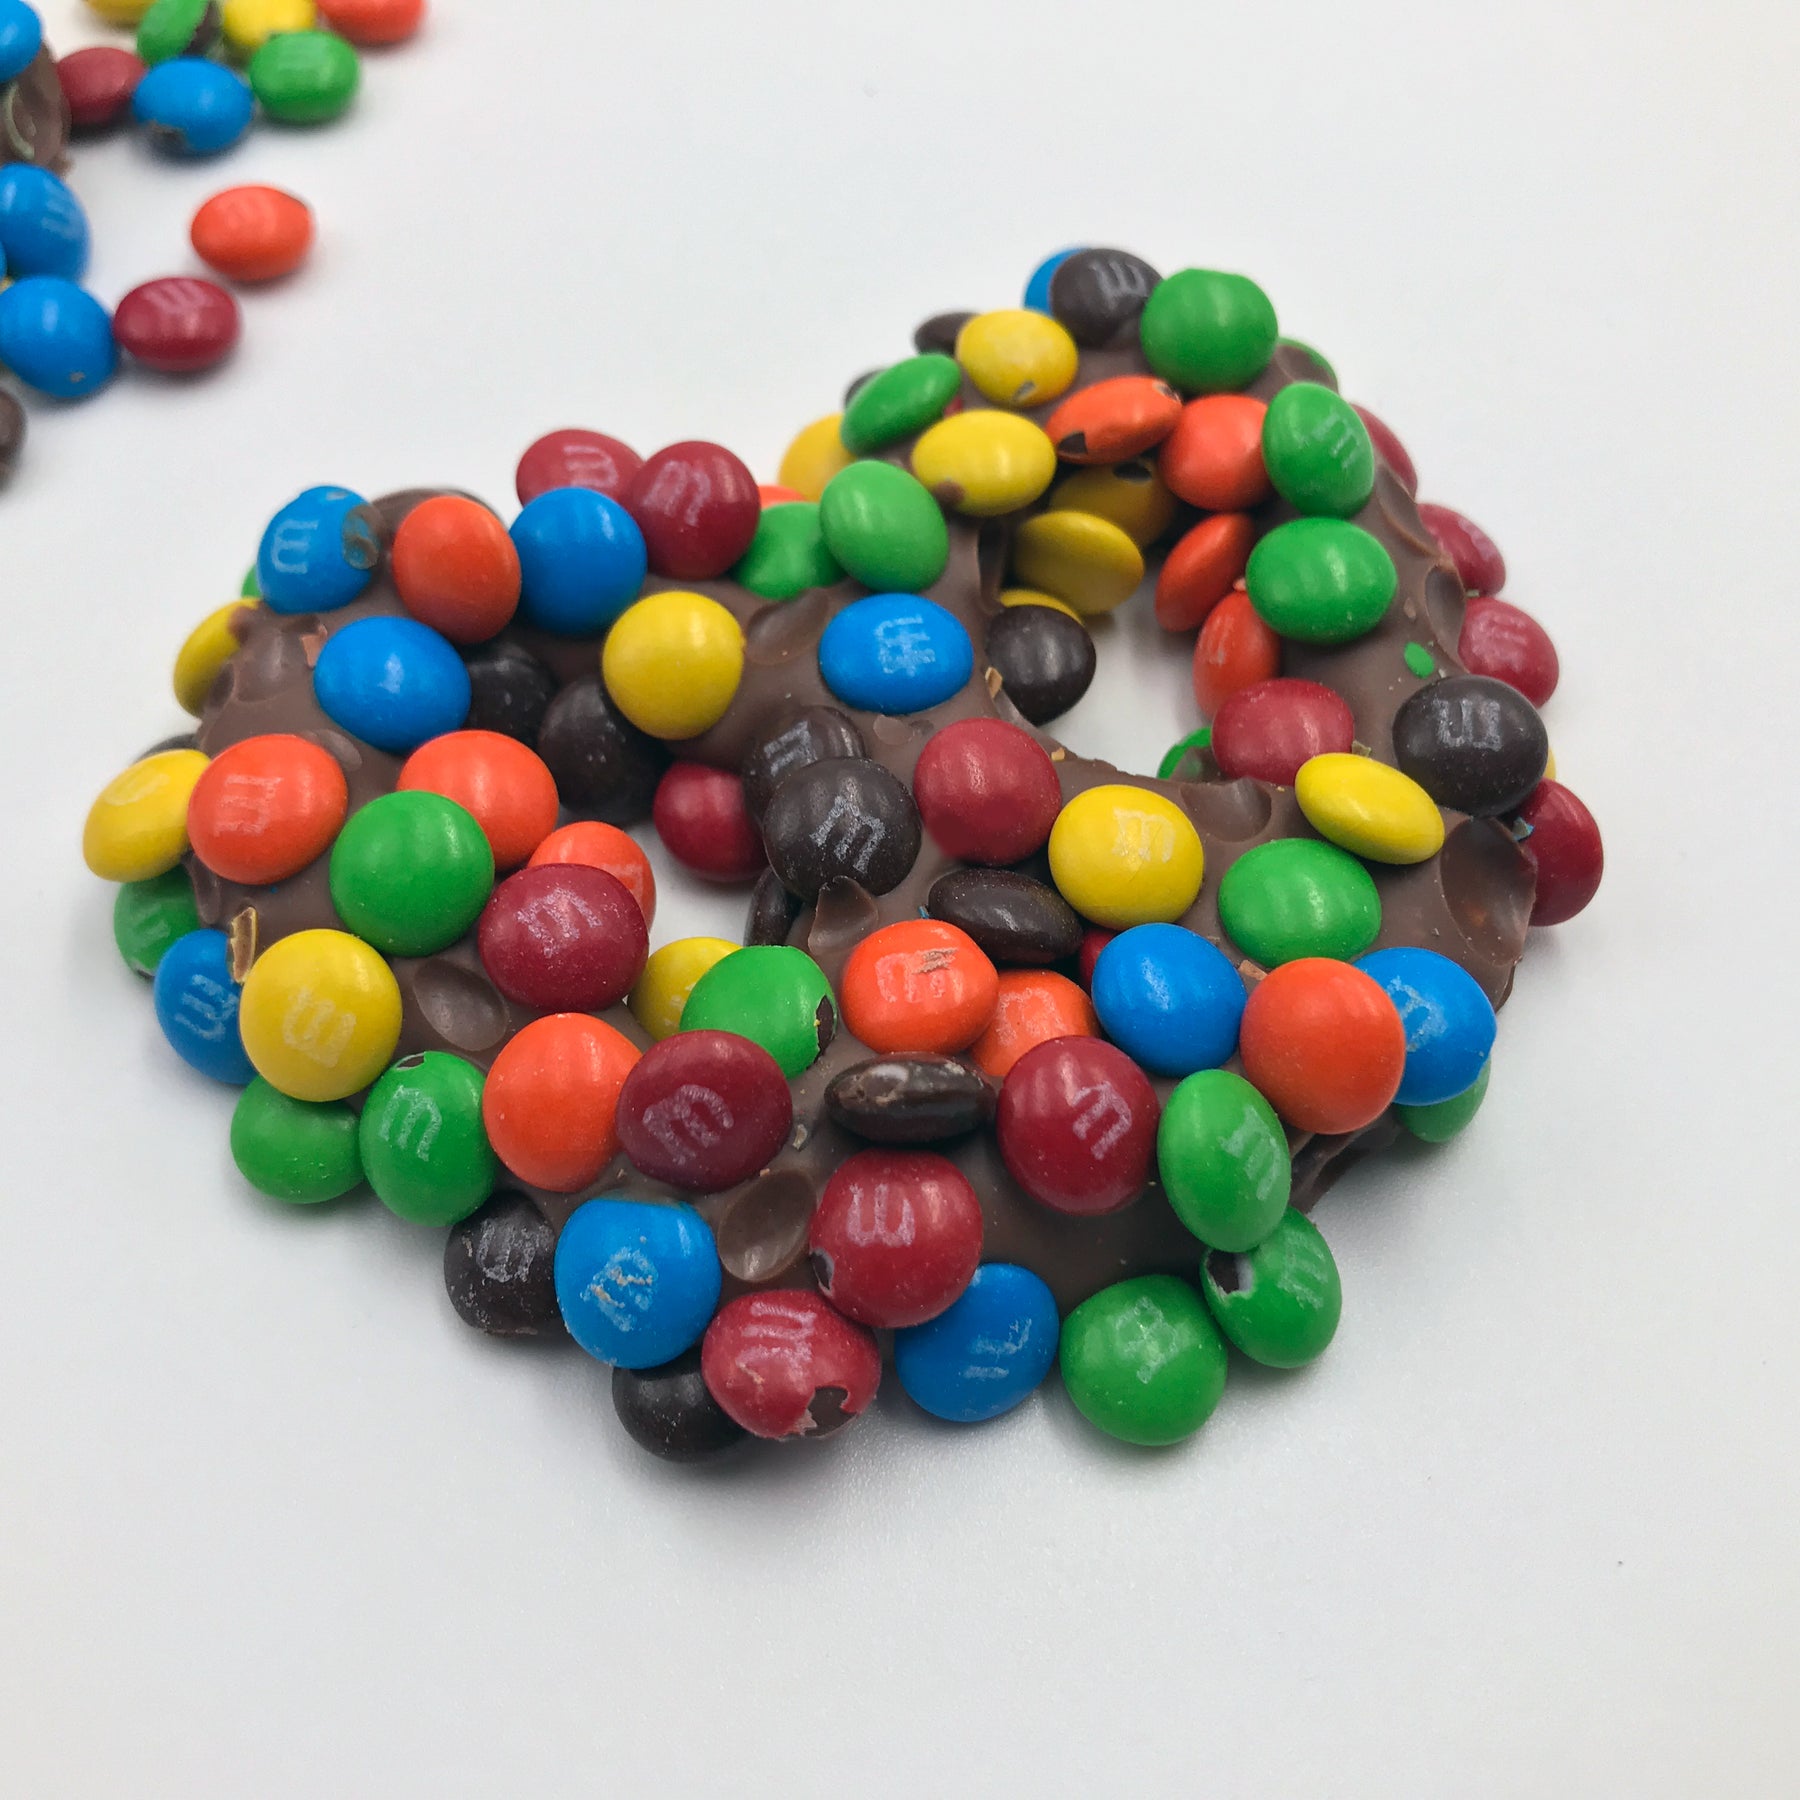 Save on M&M's Pretzel Chocolate Candies Sharing Size Order Online Delivery